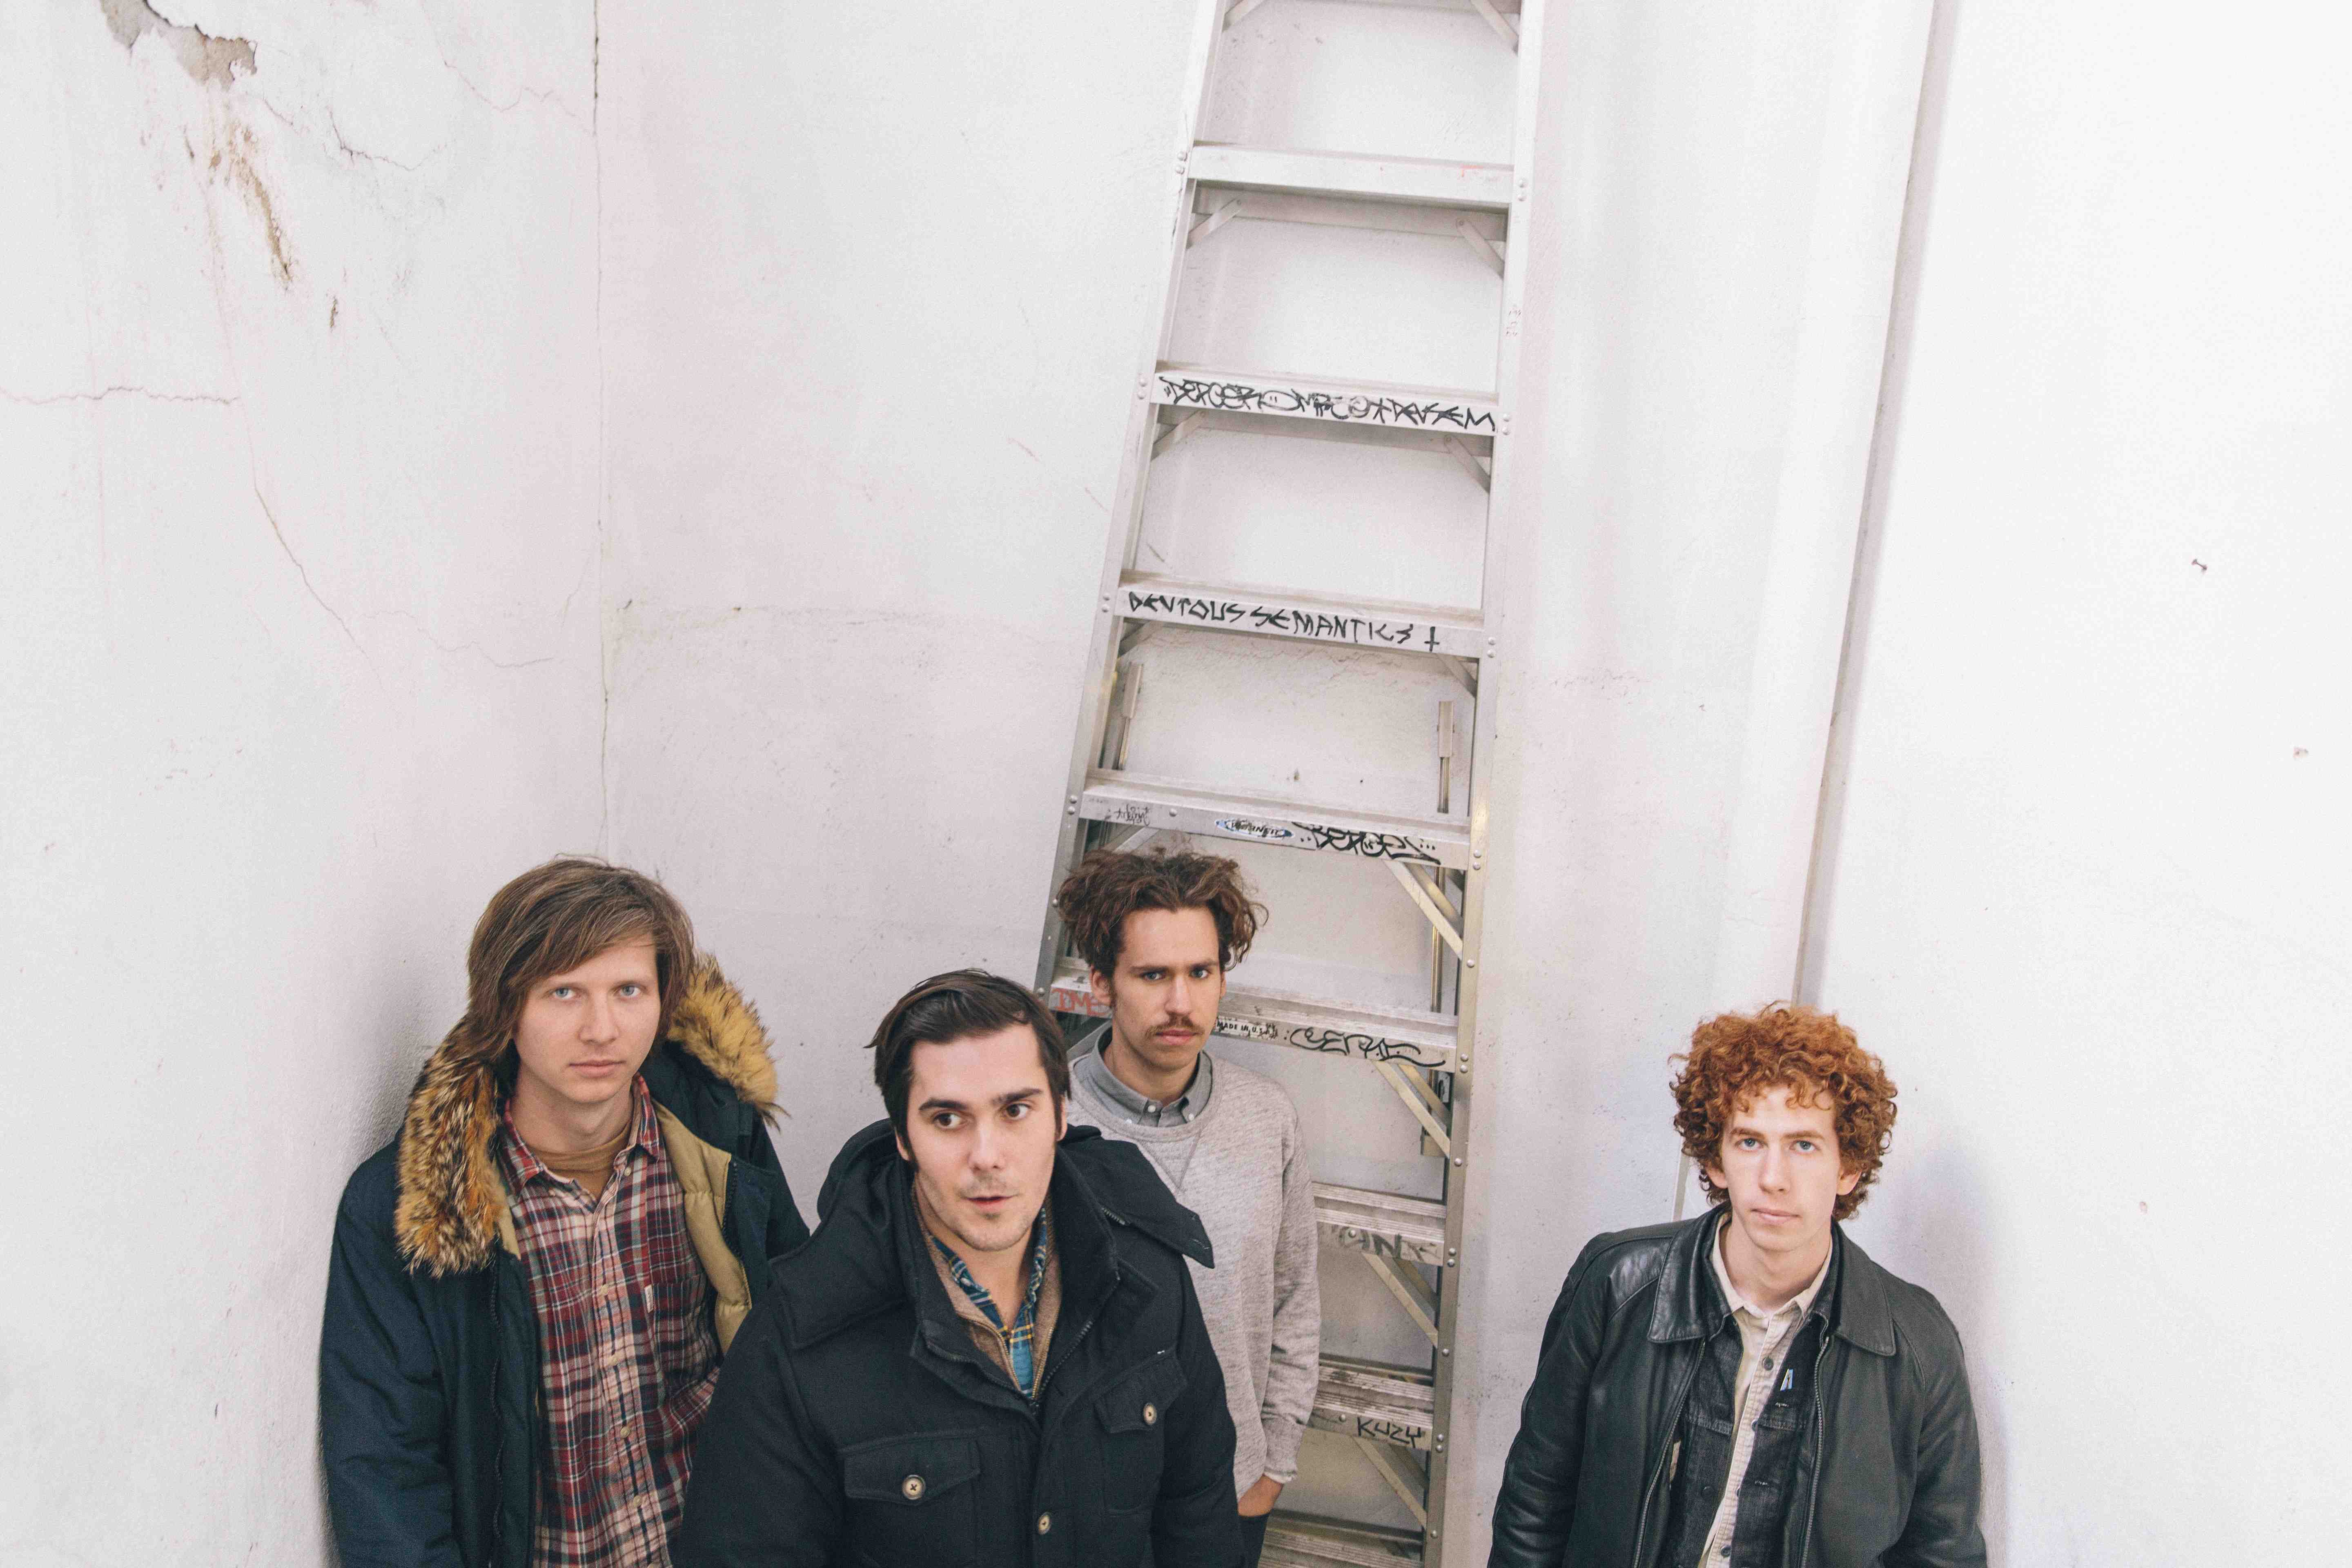 Parquet Courts Us At Meetfactory On October 19 Meetfactory Music 6009